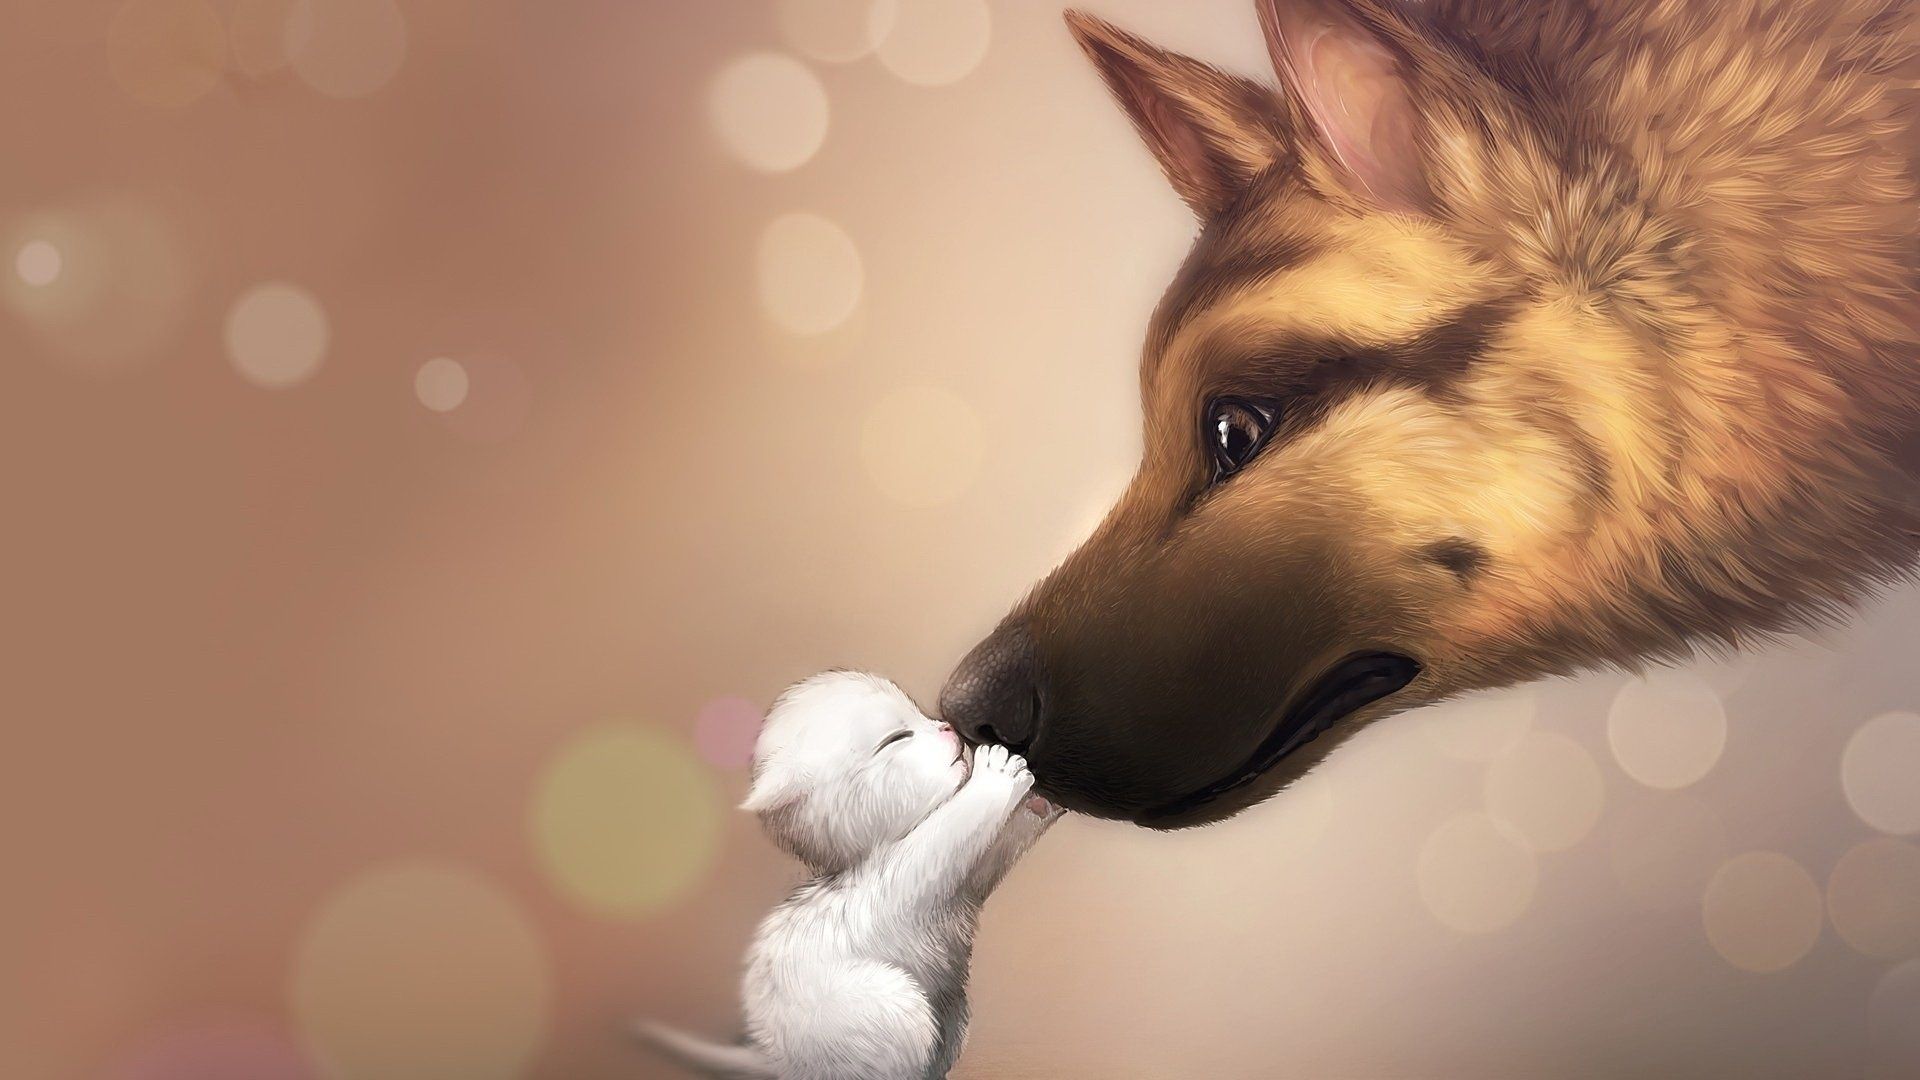 🔥 Download Cute Anime Dog Wallpaper Tiere by @cclark93 | Cute Anime